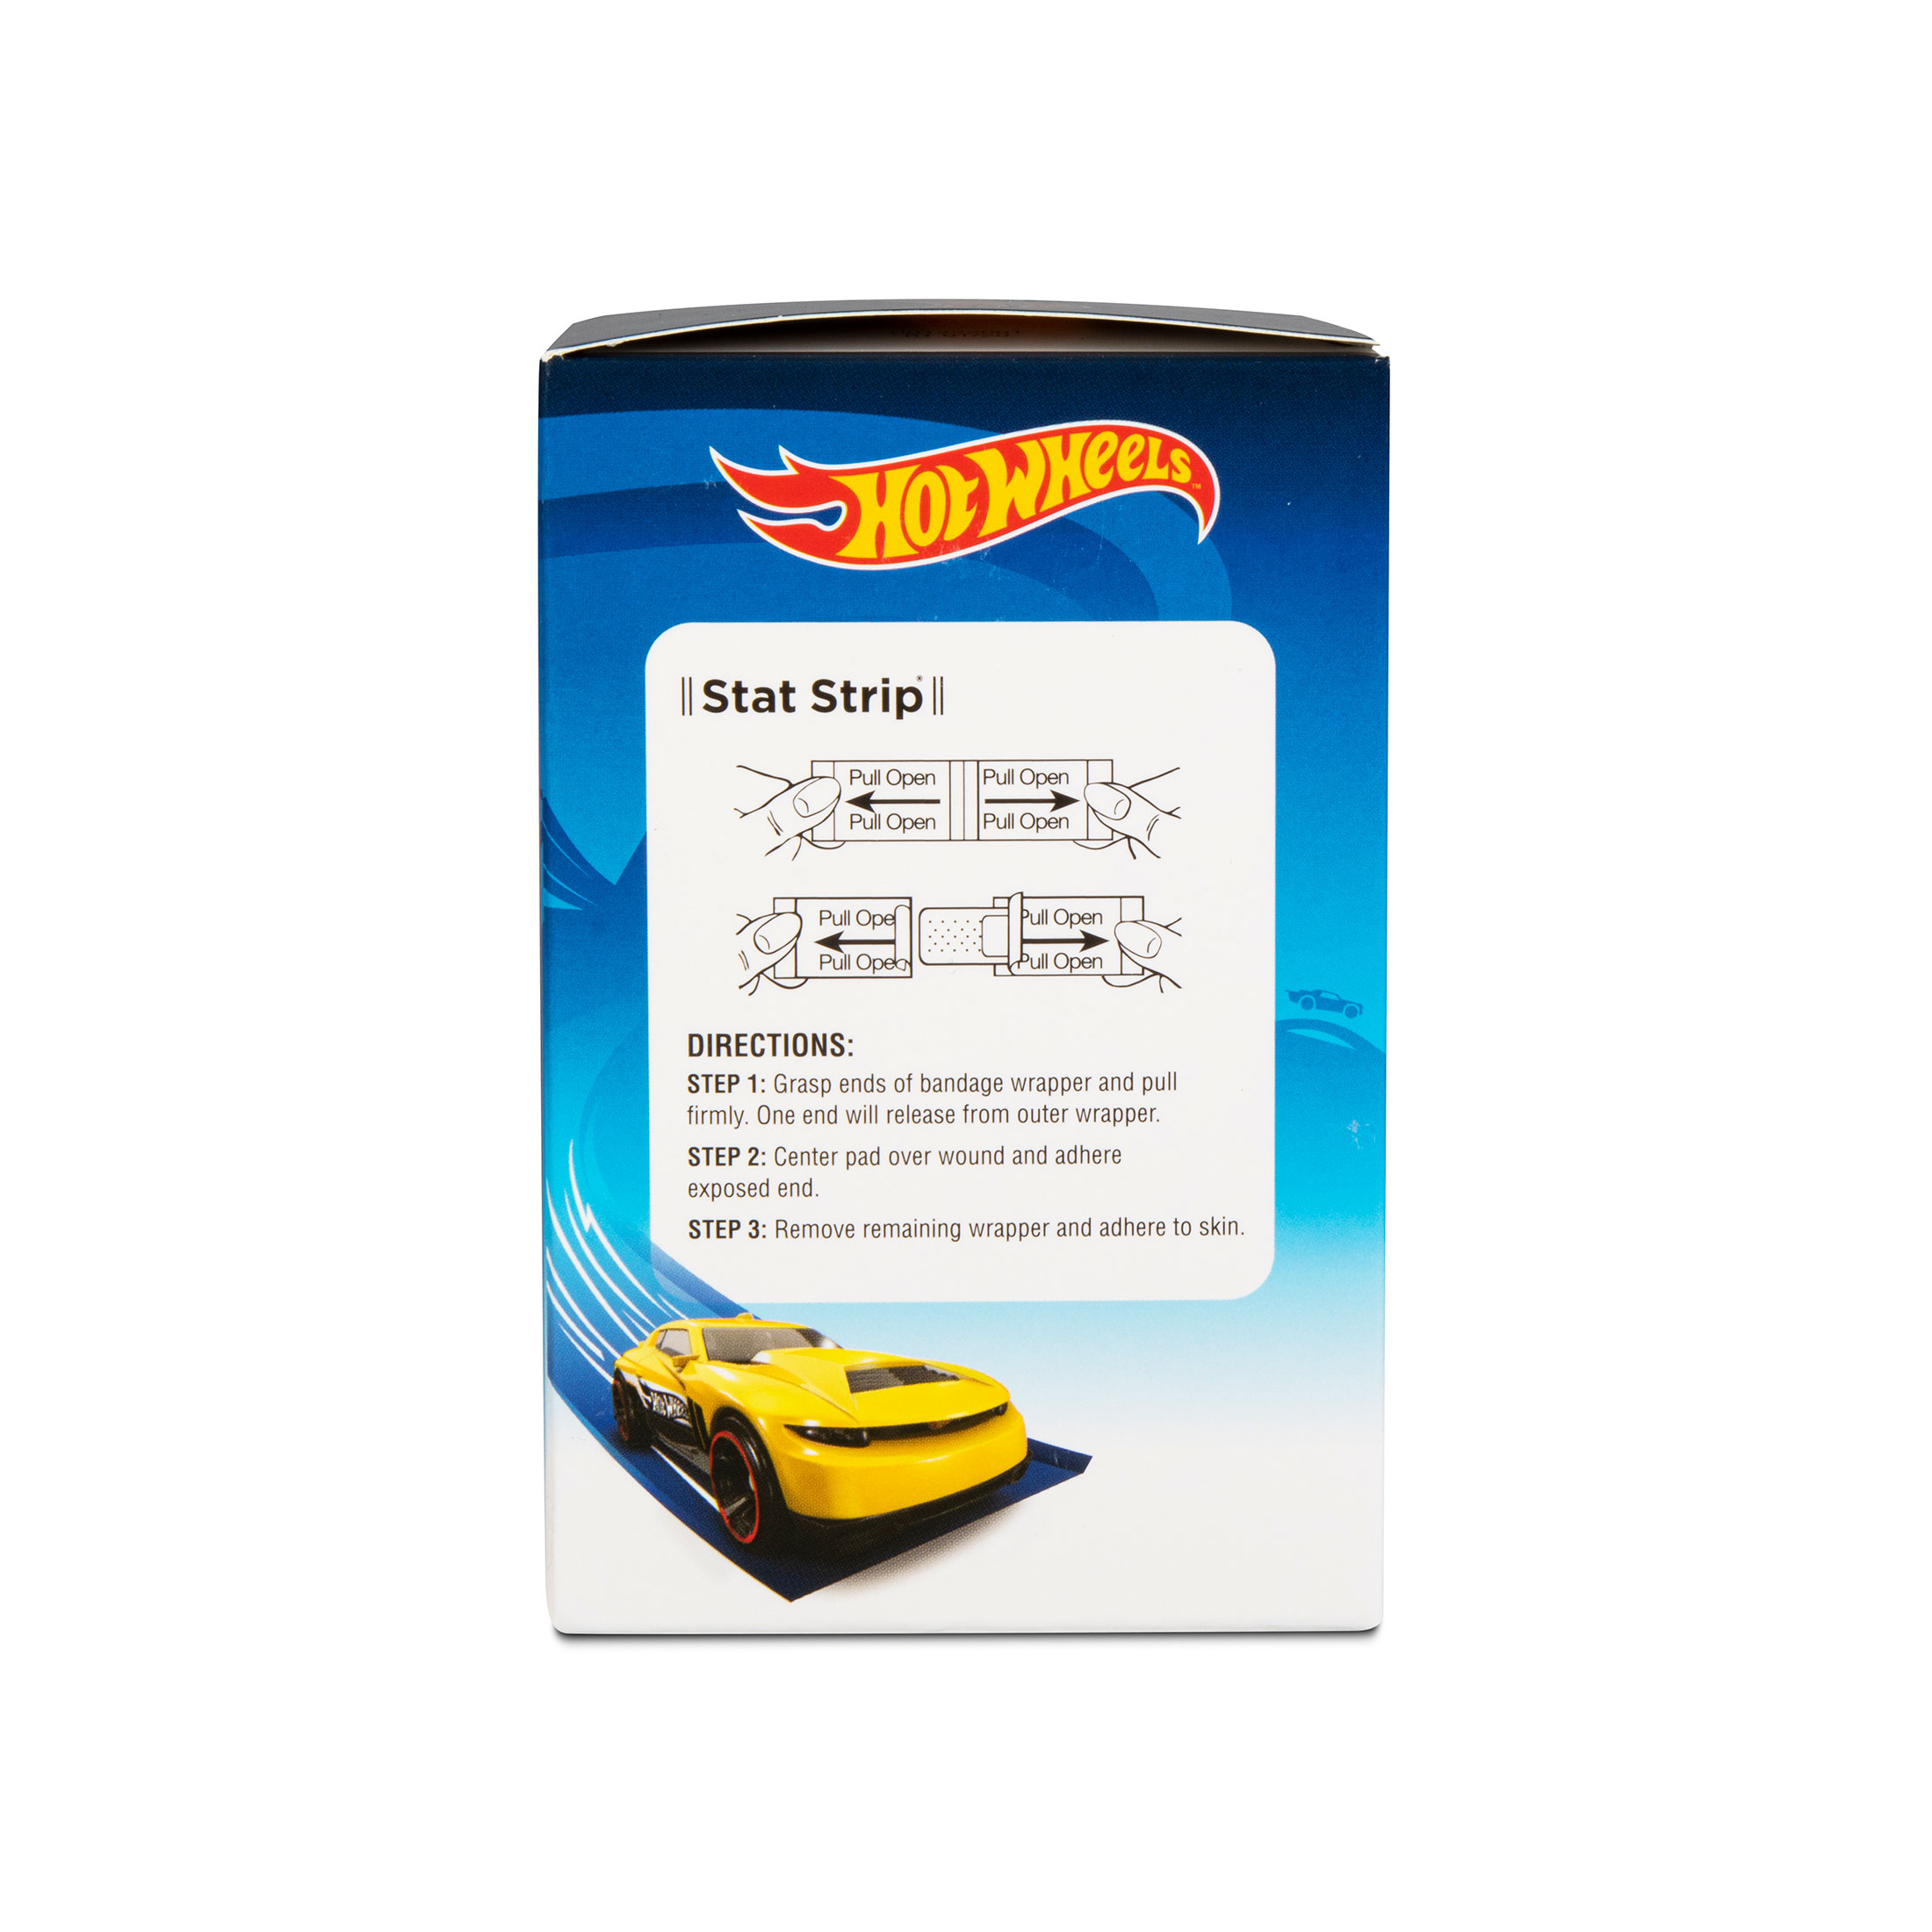  Hot Wheels Stat Strip Bandages by American White Cross